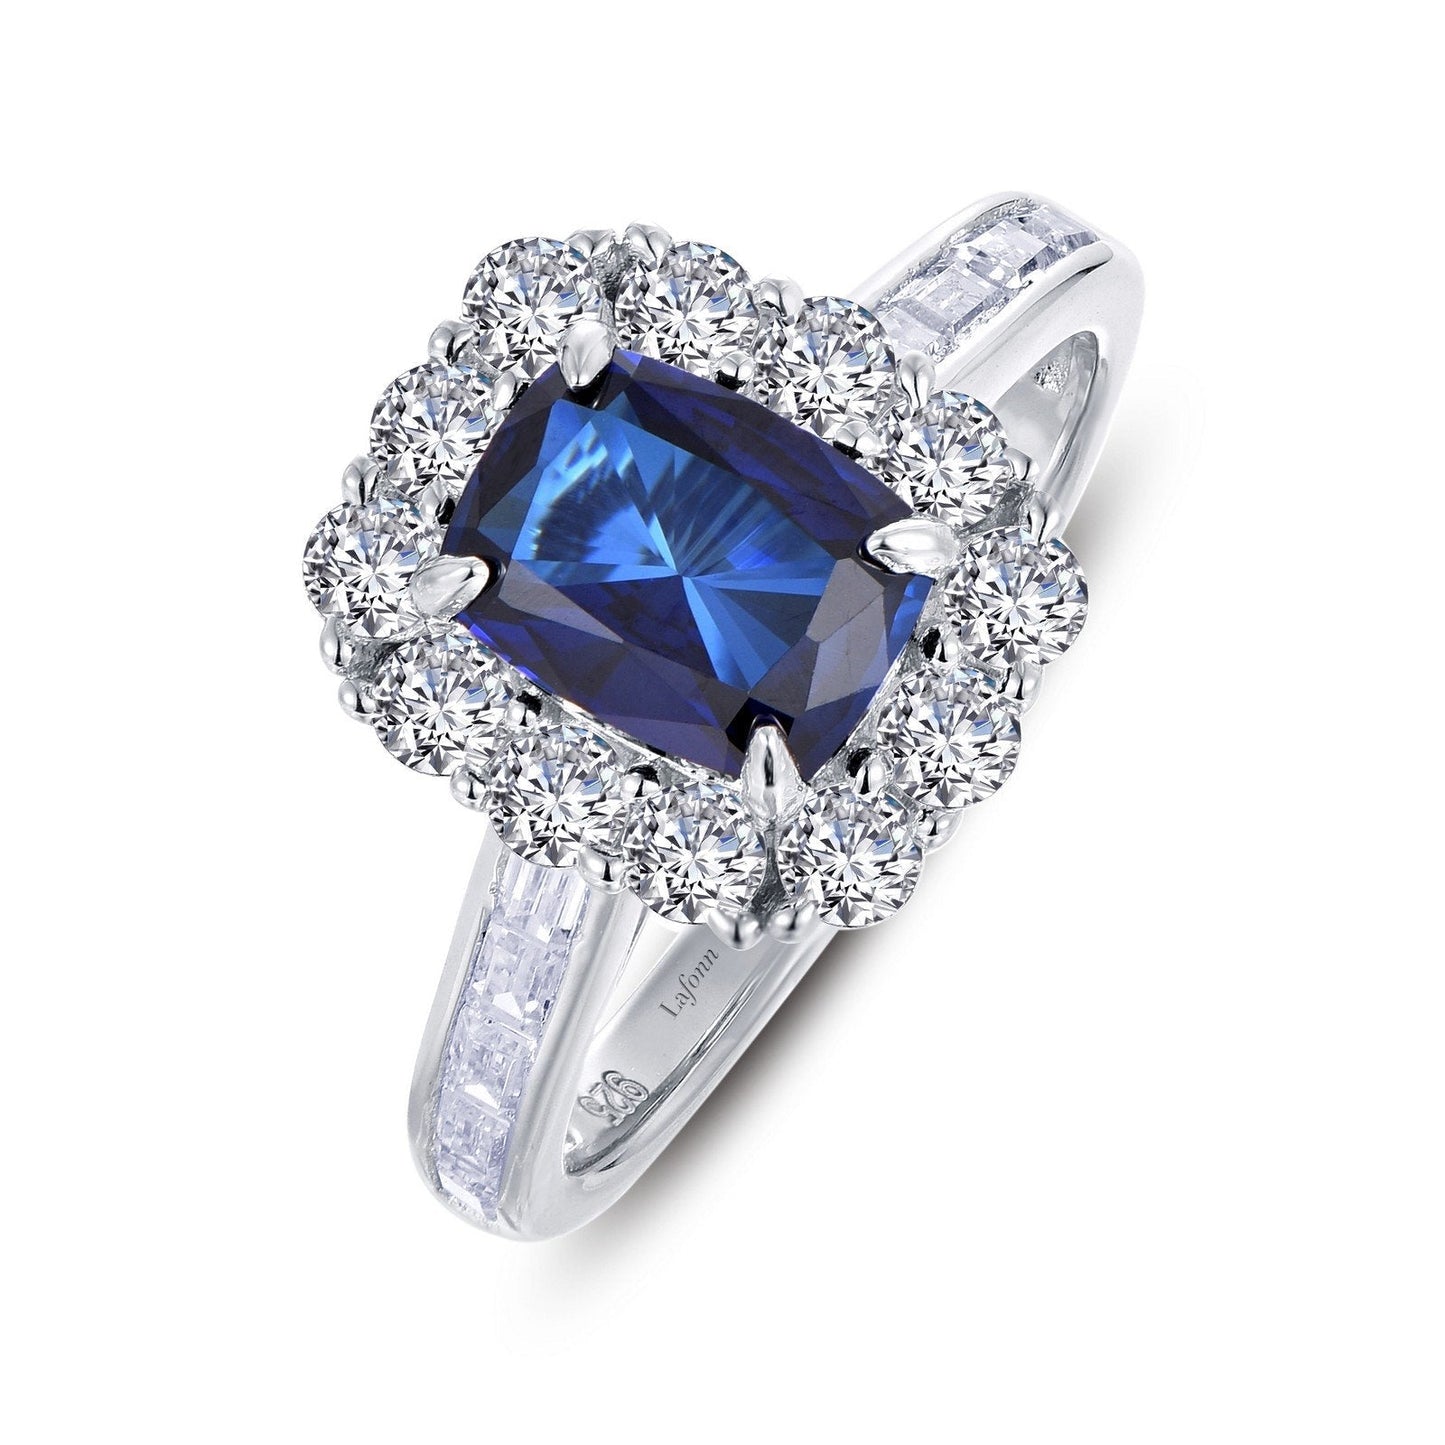 Load image into Gallery viewer, Lafonn Cushion-Cut Halo Engagement Ring Sapphire RINGS Size 5 Platinum 4.06 CTS Approx.10.8(W)
